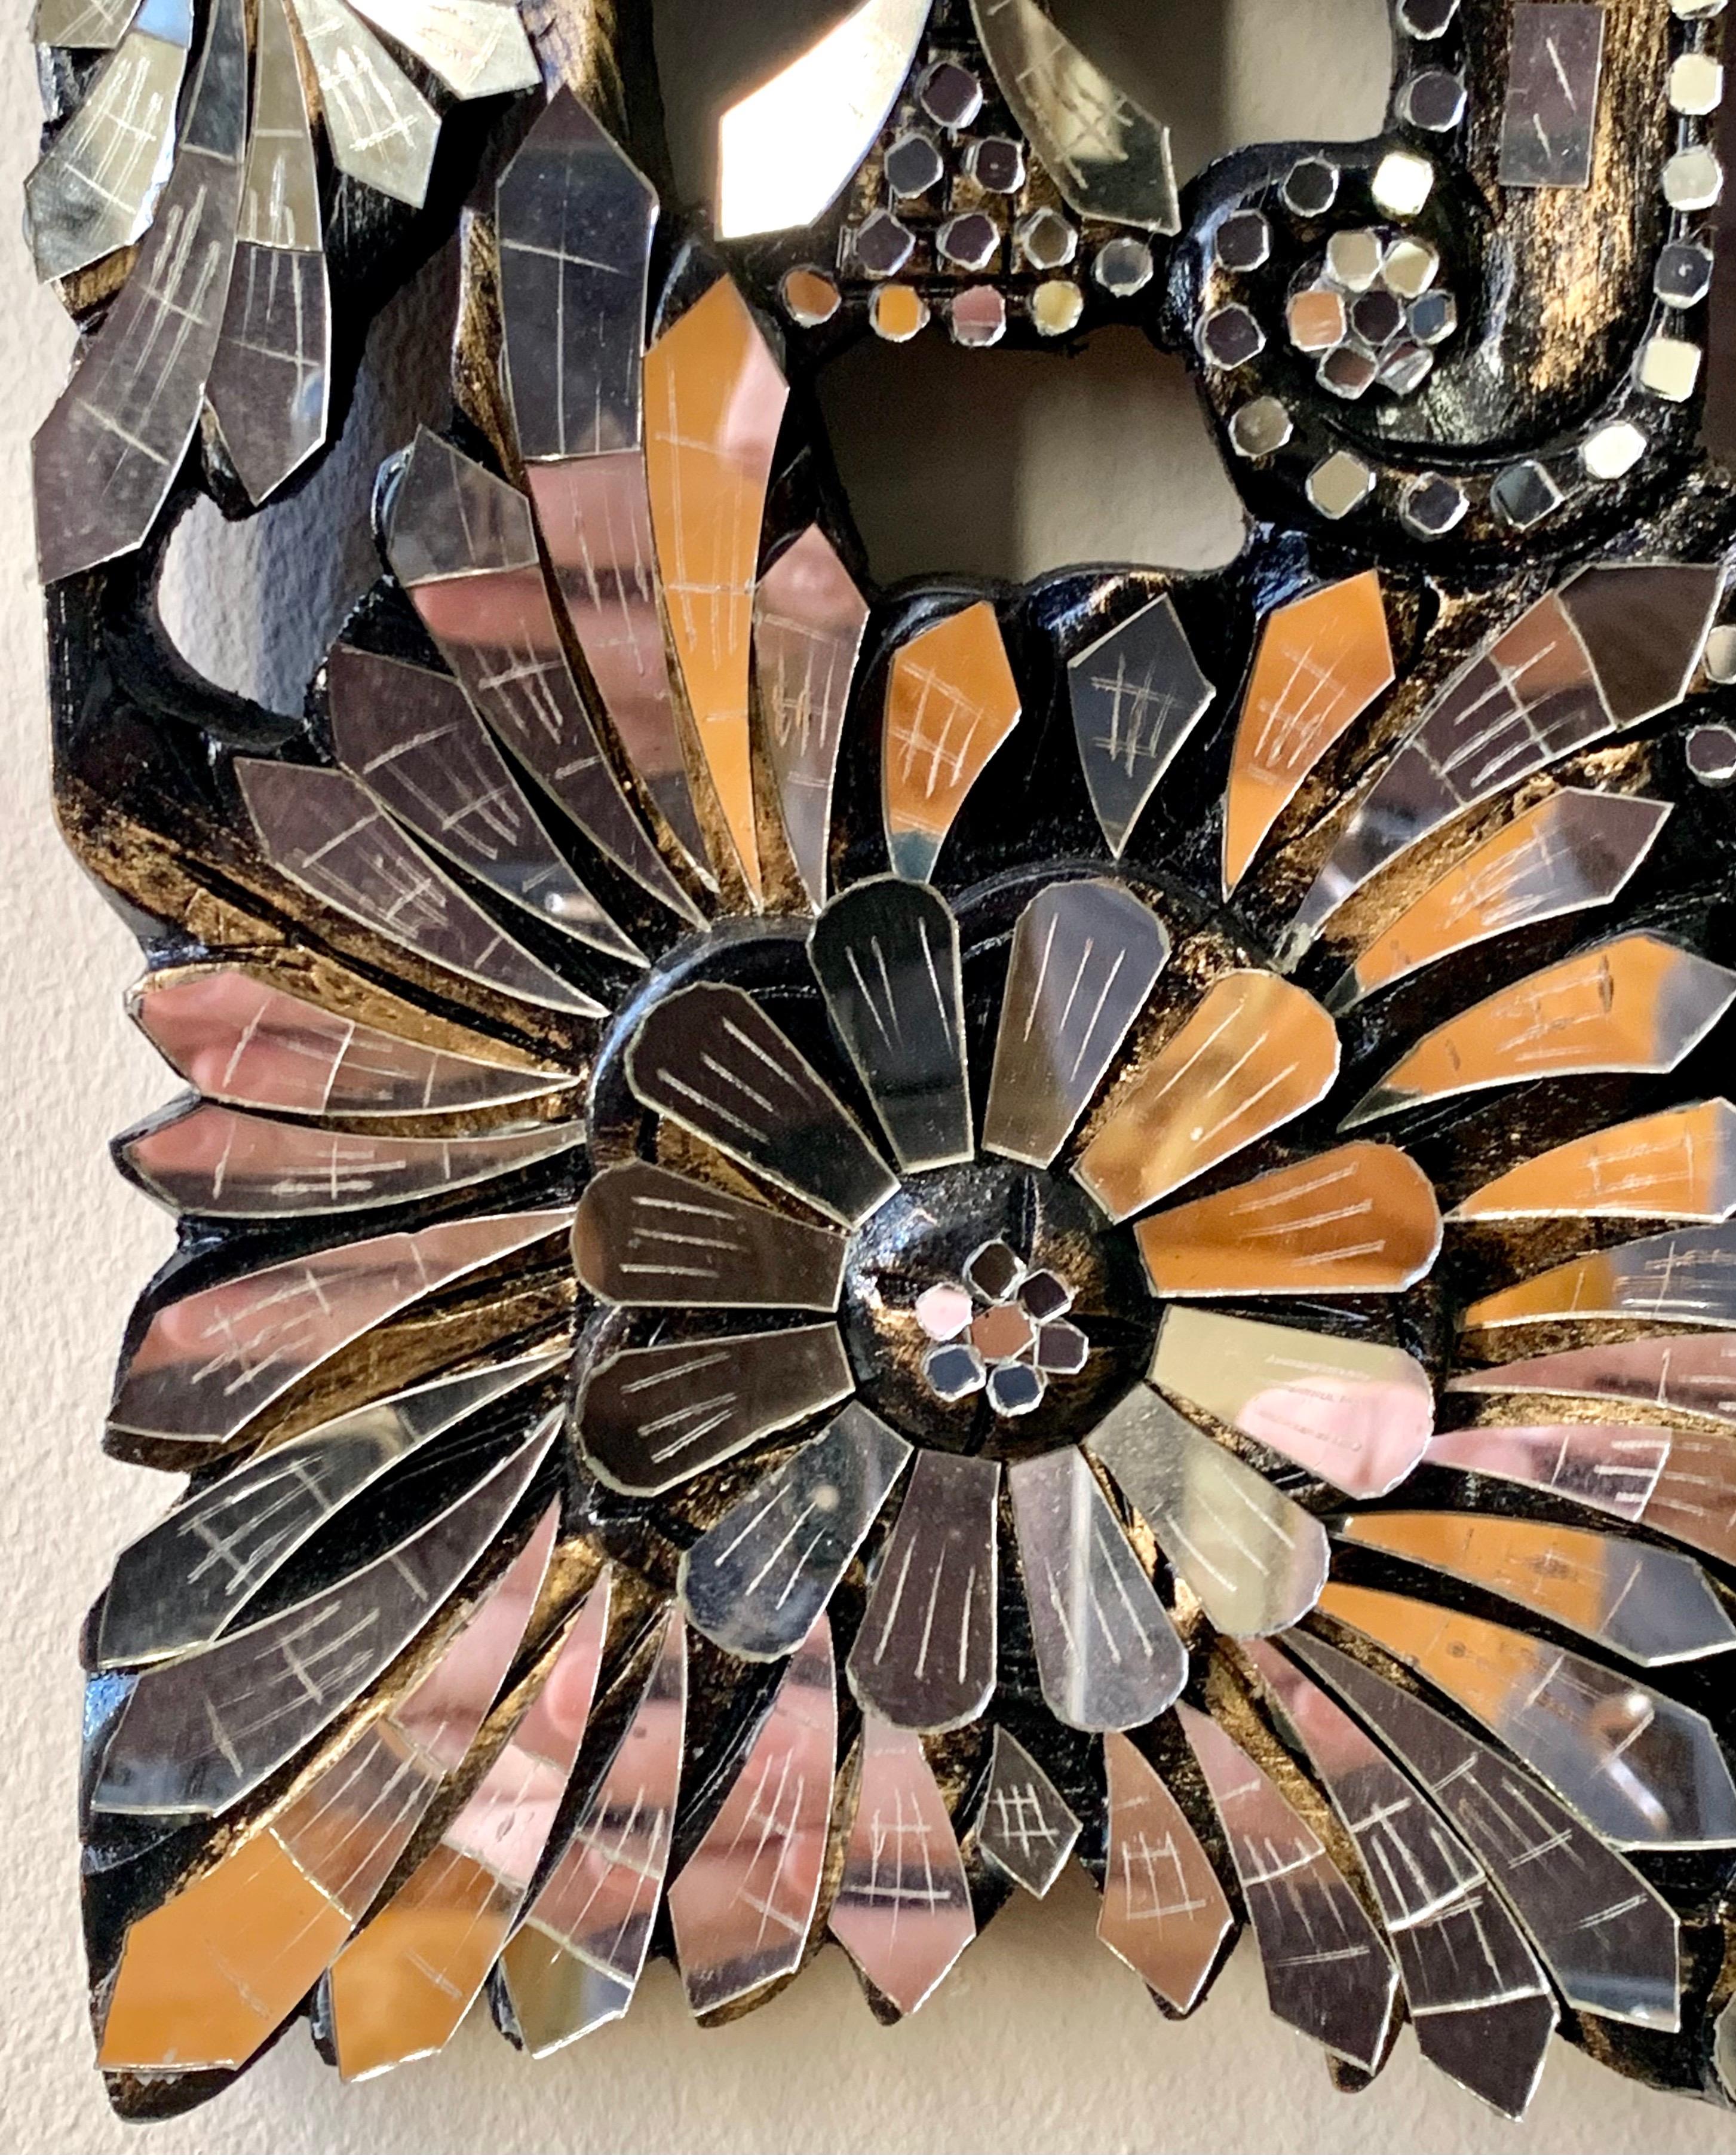 Exquisite Venetian style mirror features a border of flowers made up of layers and layers of mirrored glass. So much prettier in person.